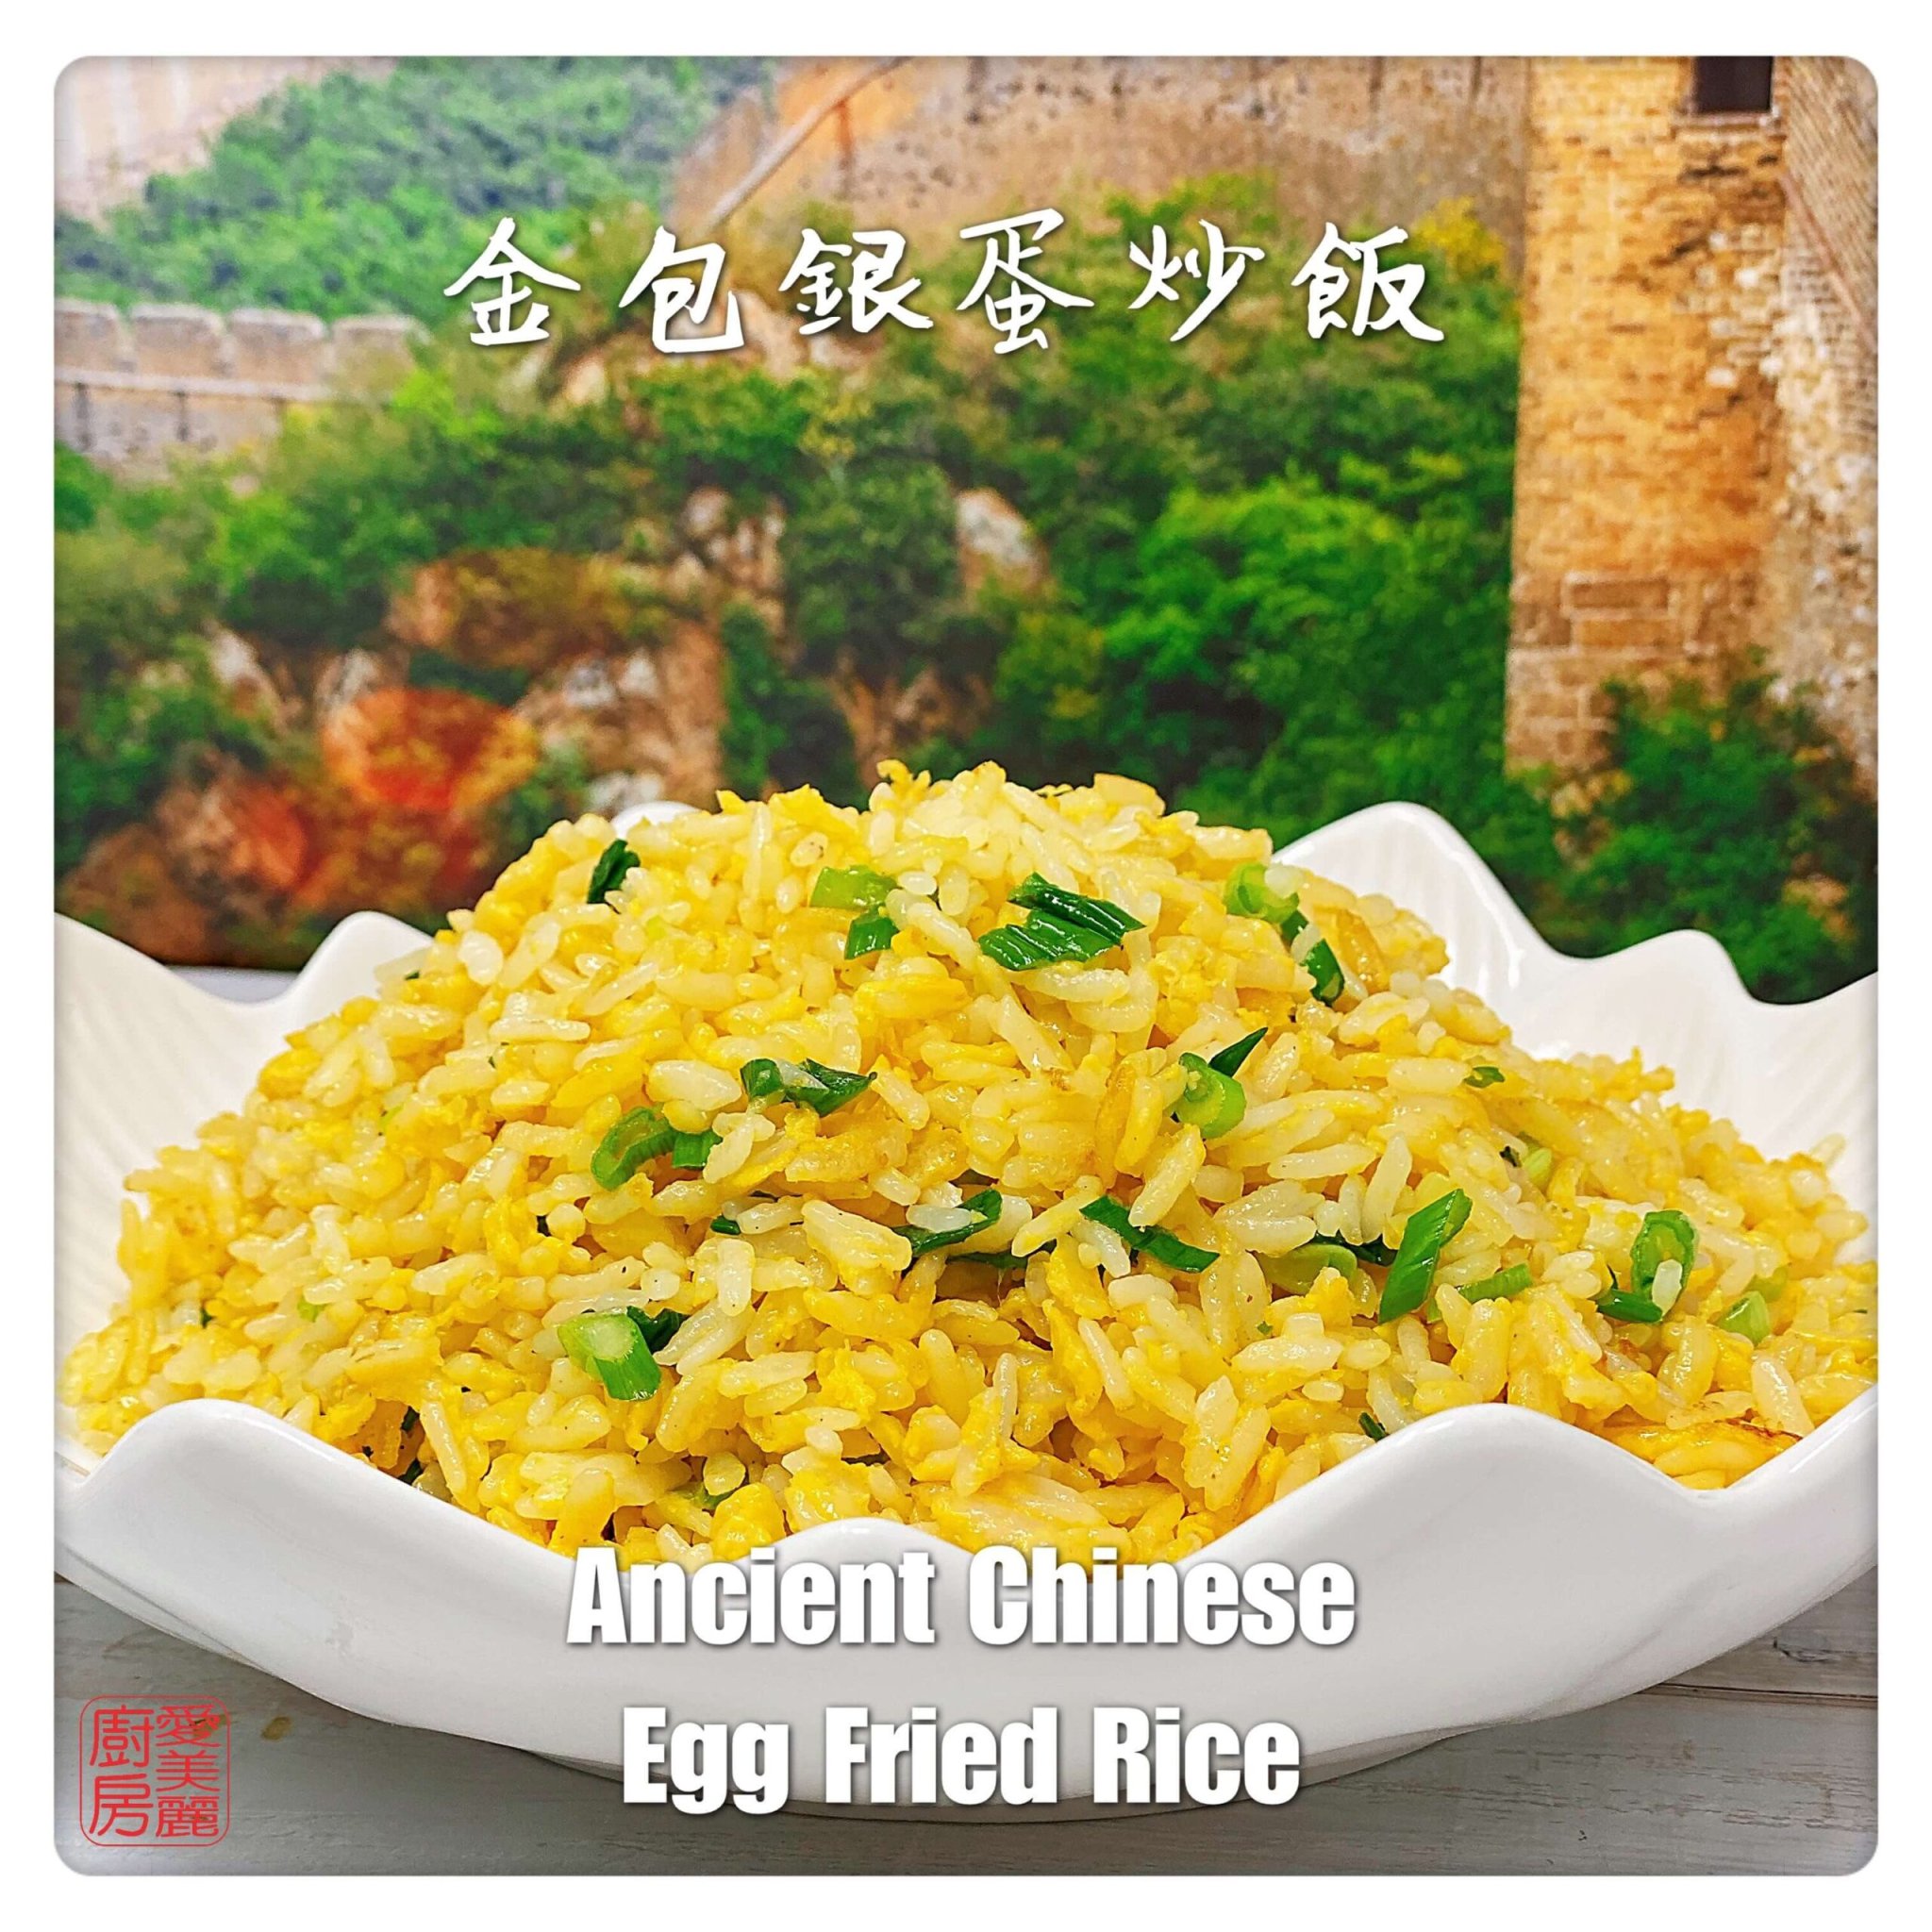 Ancient Chinese Egg Fried Rice 金包銀蛋炒飯 - Auntie Emily's Kitchen